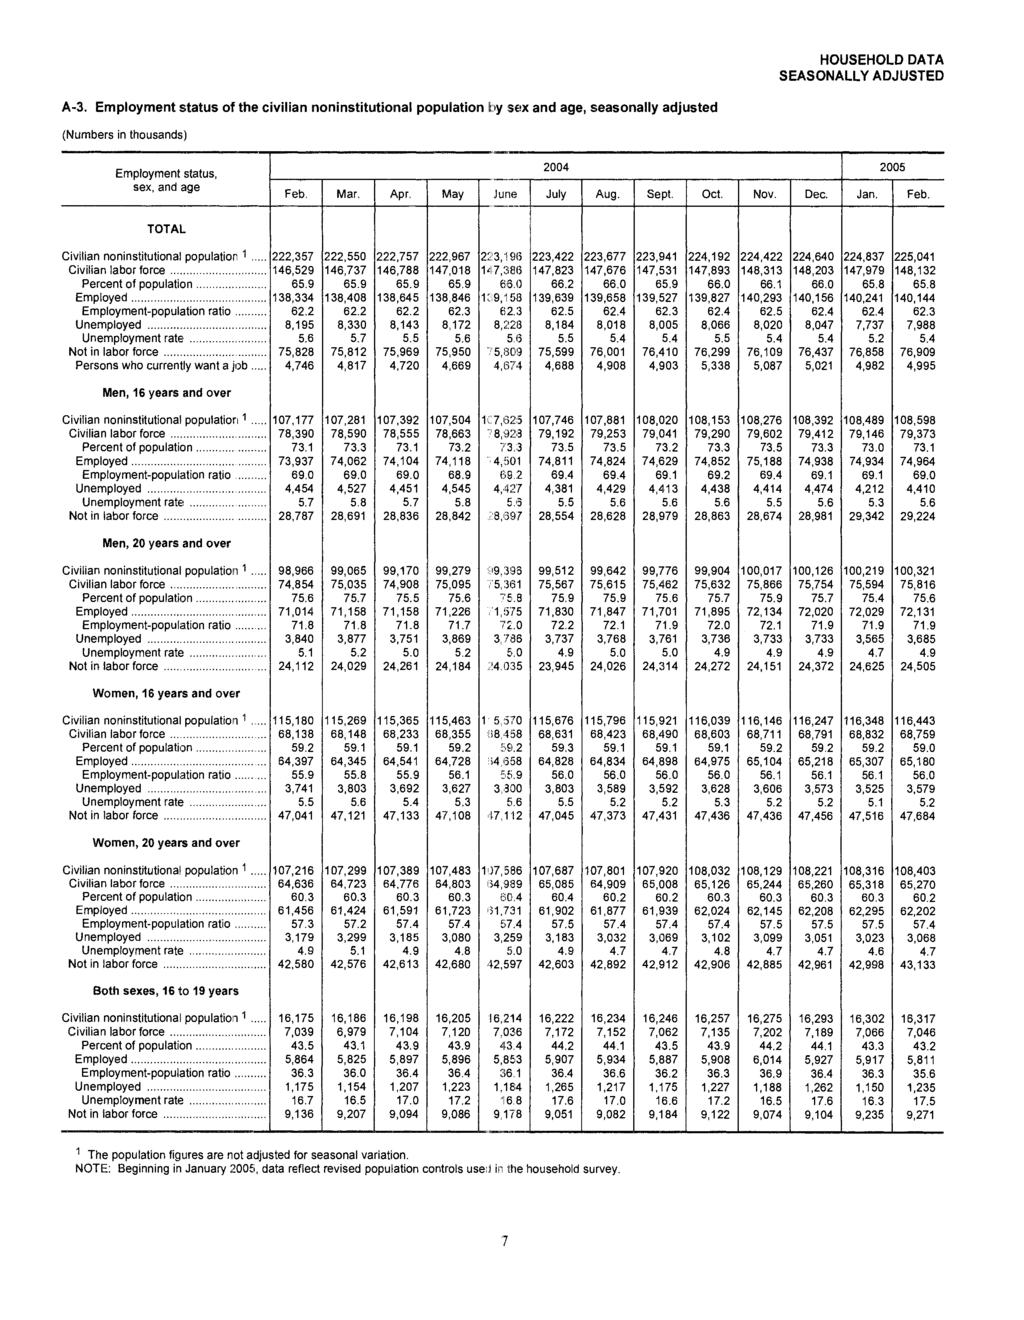 A-3. Employment status of the civilian noninstitutional population by sex and age, seasonally adjusted (Numbers in thousands) Employment status, sex, and age 2005 Mar. Apr. May June July Aug. Sept.